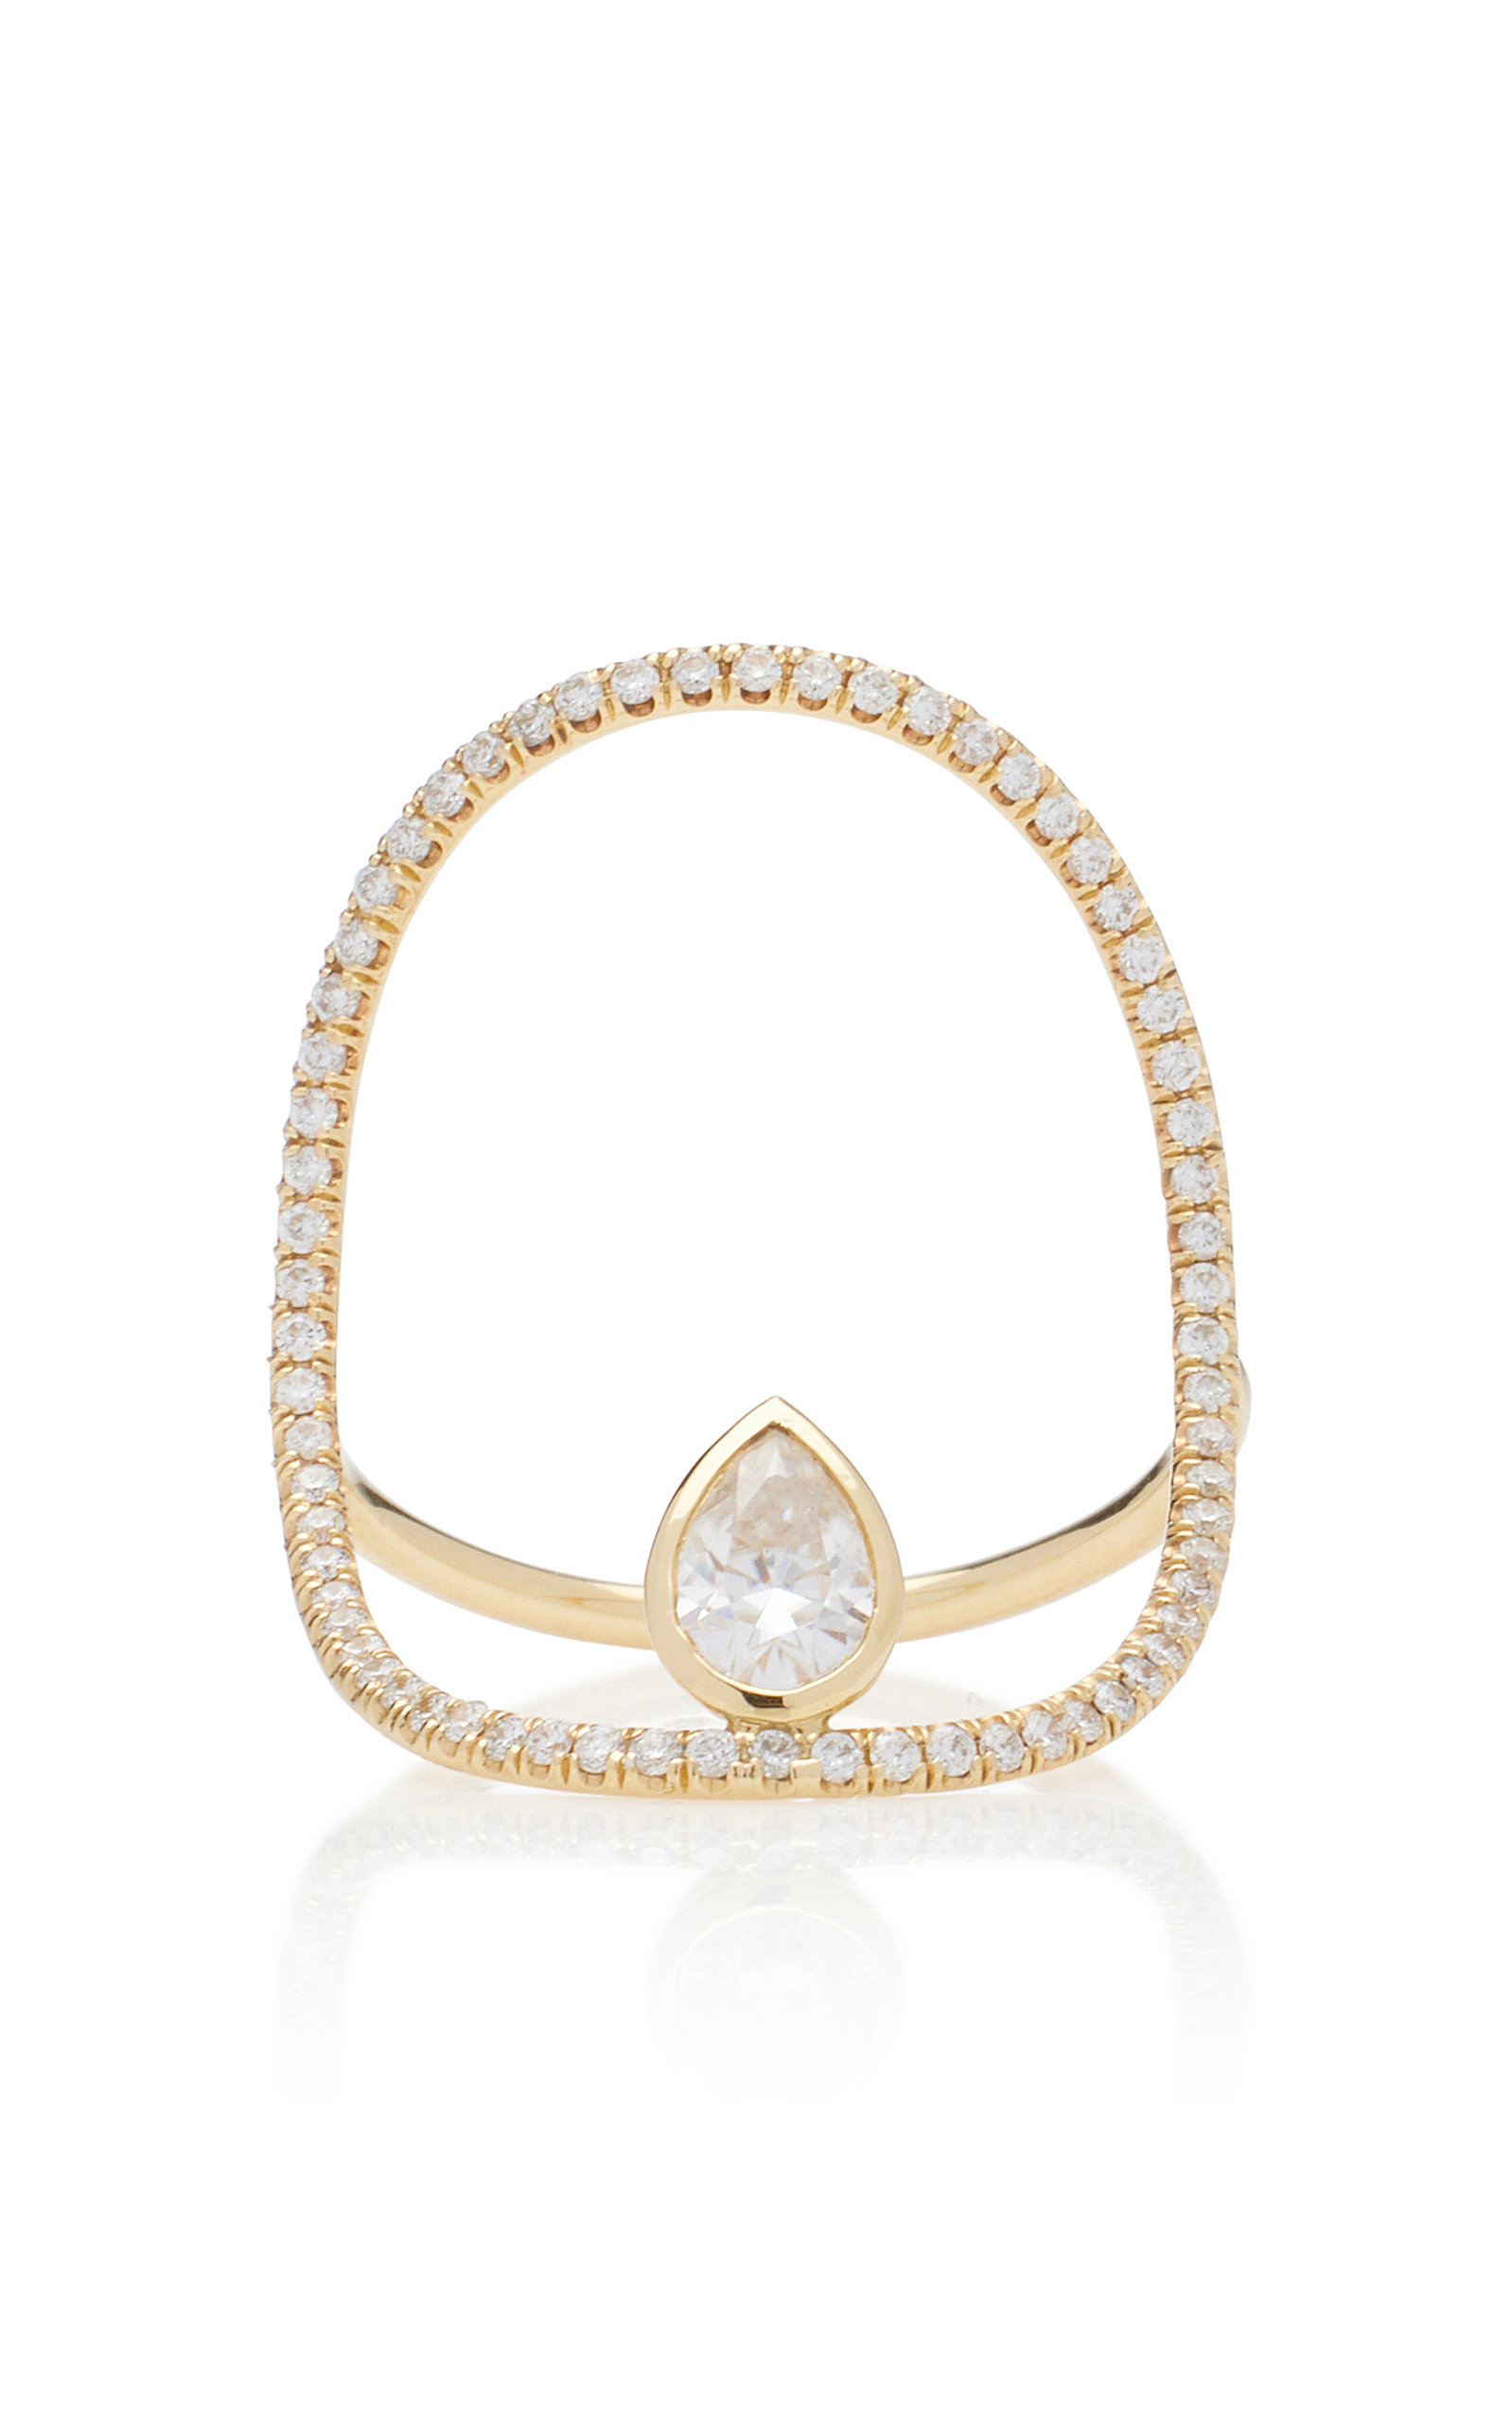 White/Space Continuity 14K Yellow Gold Diamond Ring